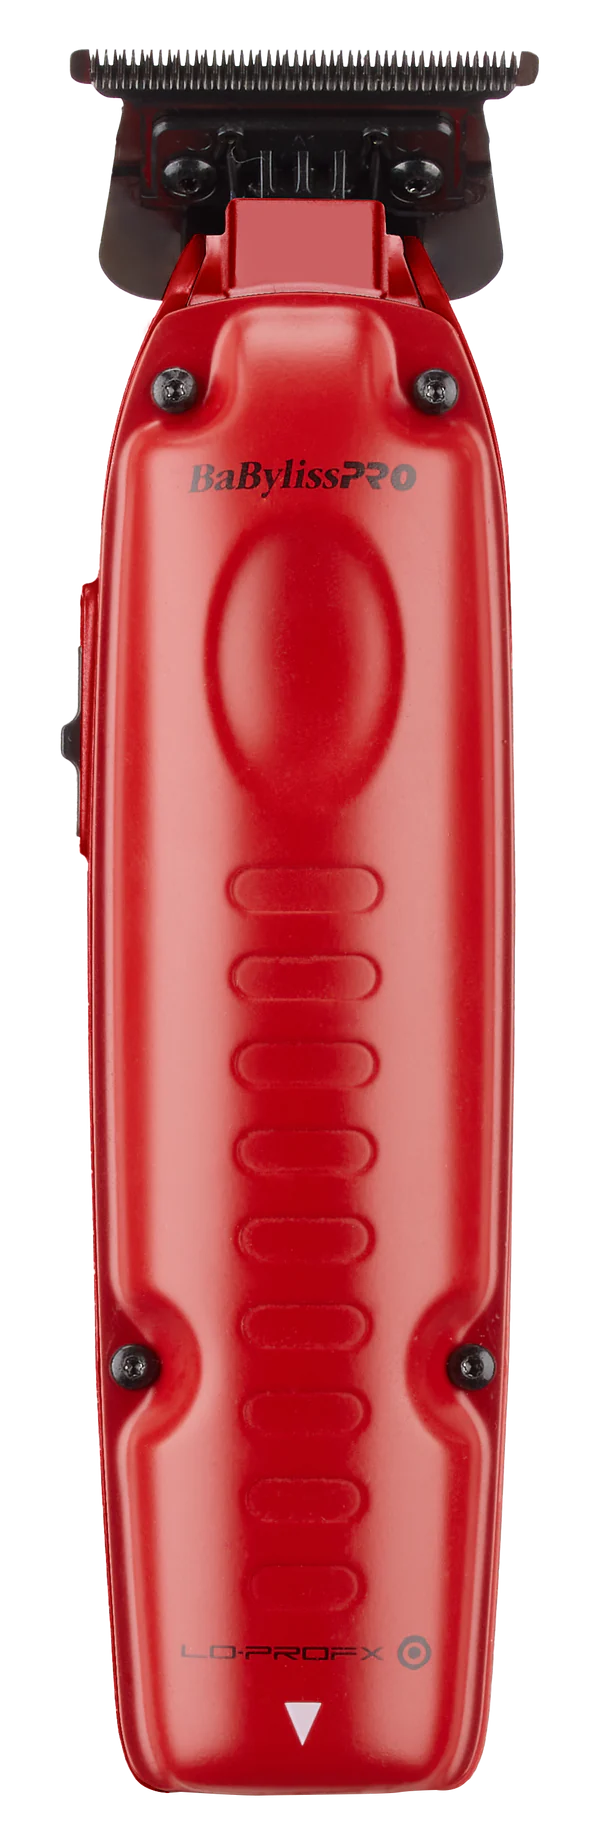 BaBylissPRO FXONE Lo-ProFX Matte Red High Performance Low Profile Trimmer w Interchangeable Lithium Battery Pack – FX729MR